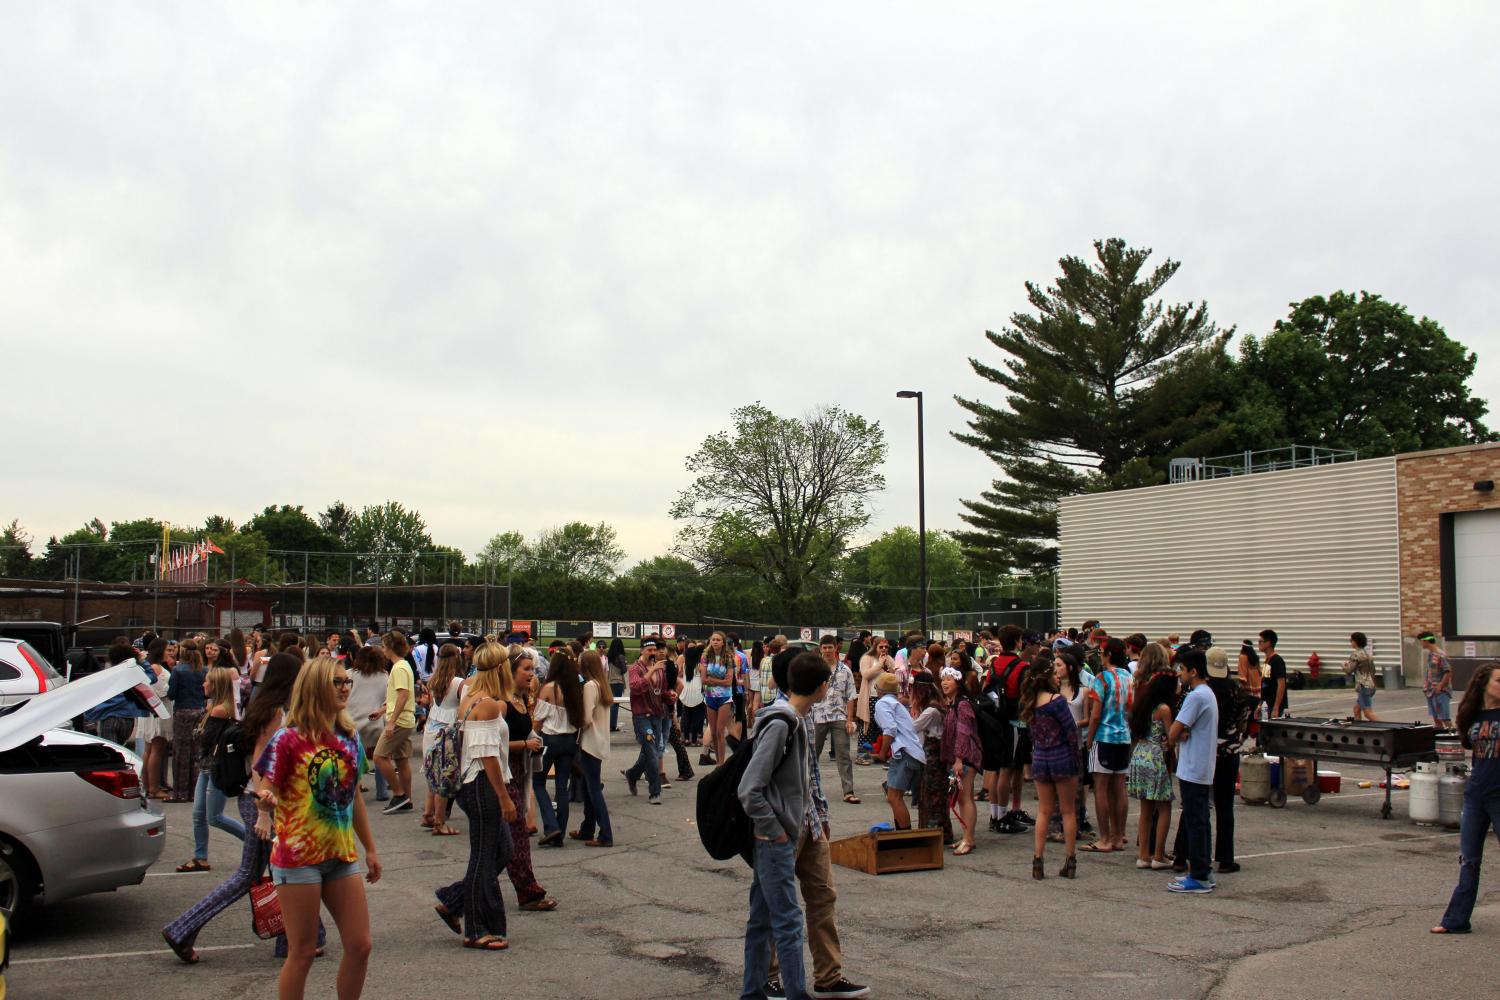 The tailgate brings the incoming senior class together as a way to kick off the final year of high school.  Last year the theme was Woodstock, but this year it will be USA.